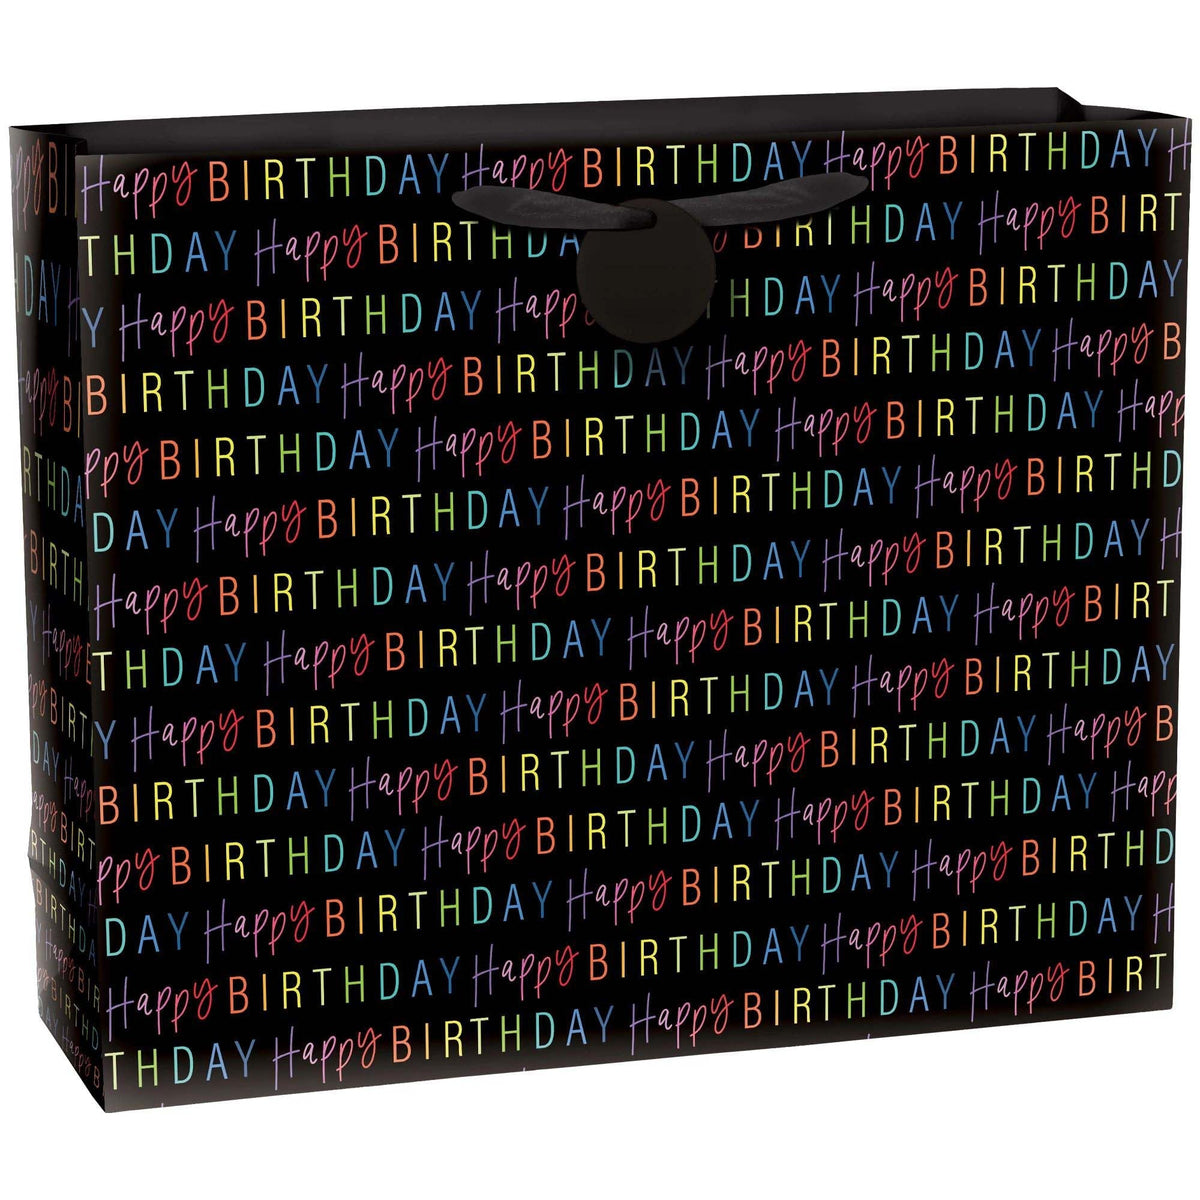 AMSCAN CA Gift Wrap & Bags Rainbow Happy Birthday Large Gift Bag, 13 x 10.5 x 5 Inches, 1 Count